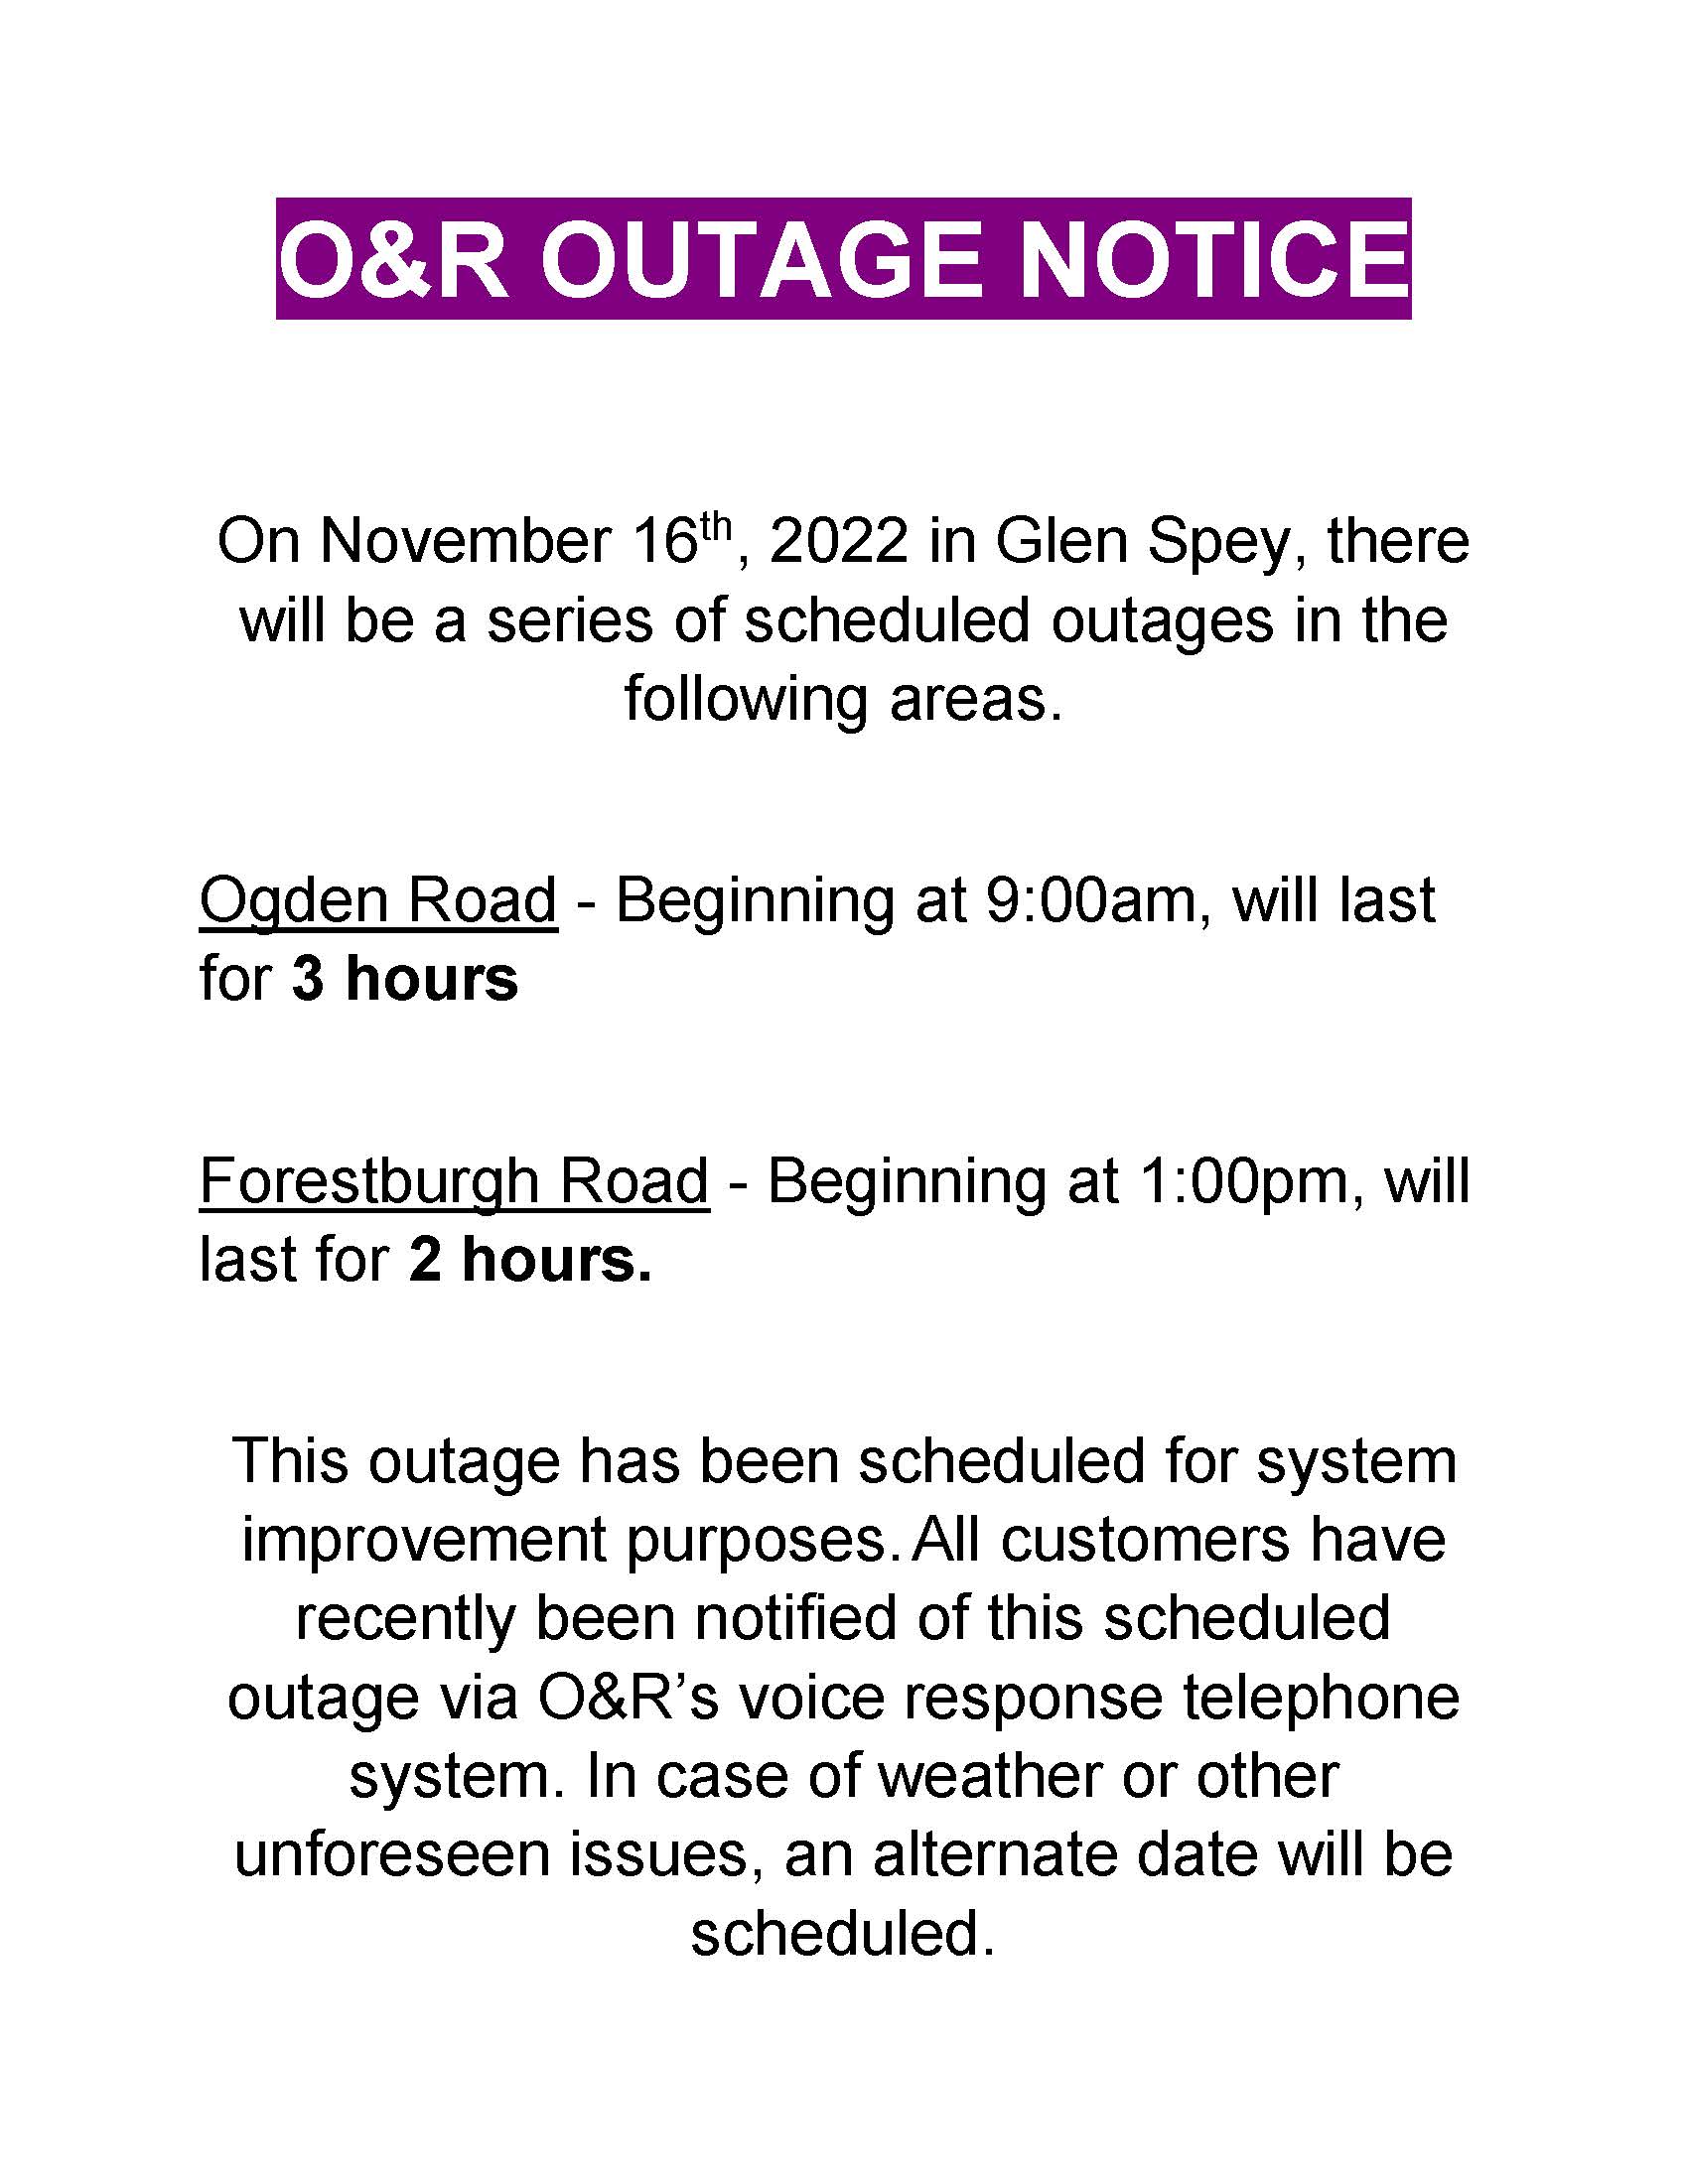 OR Outage Notice